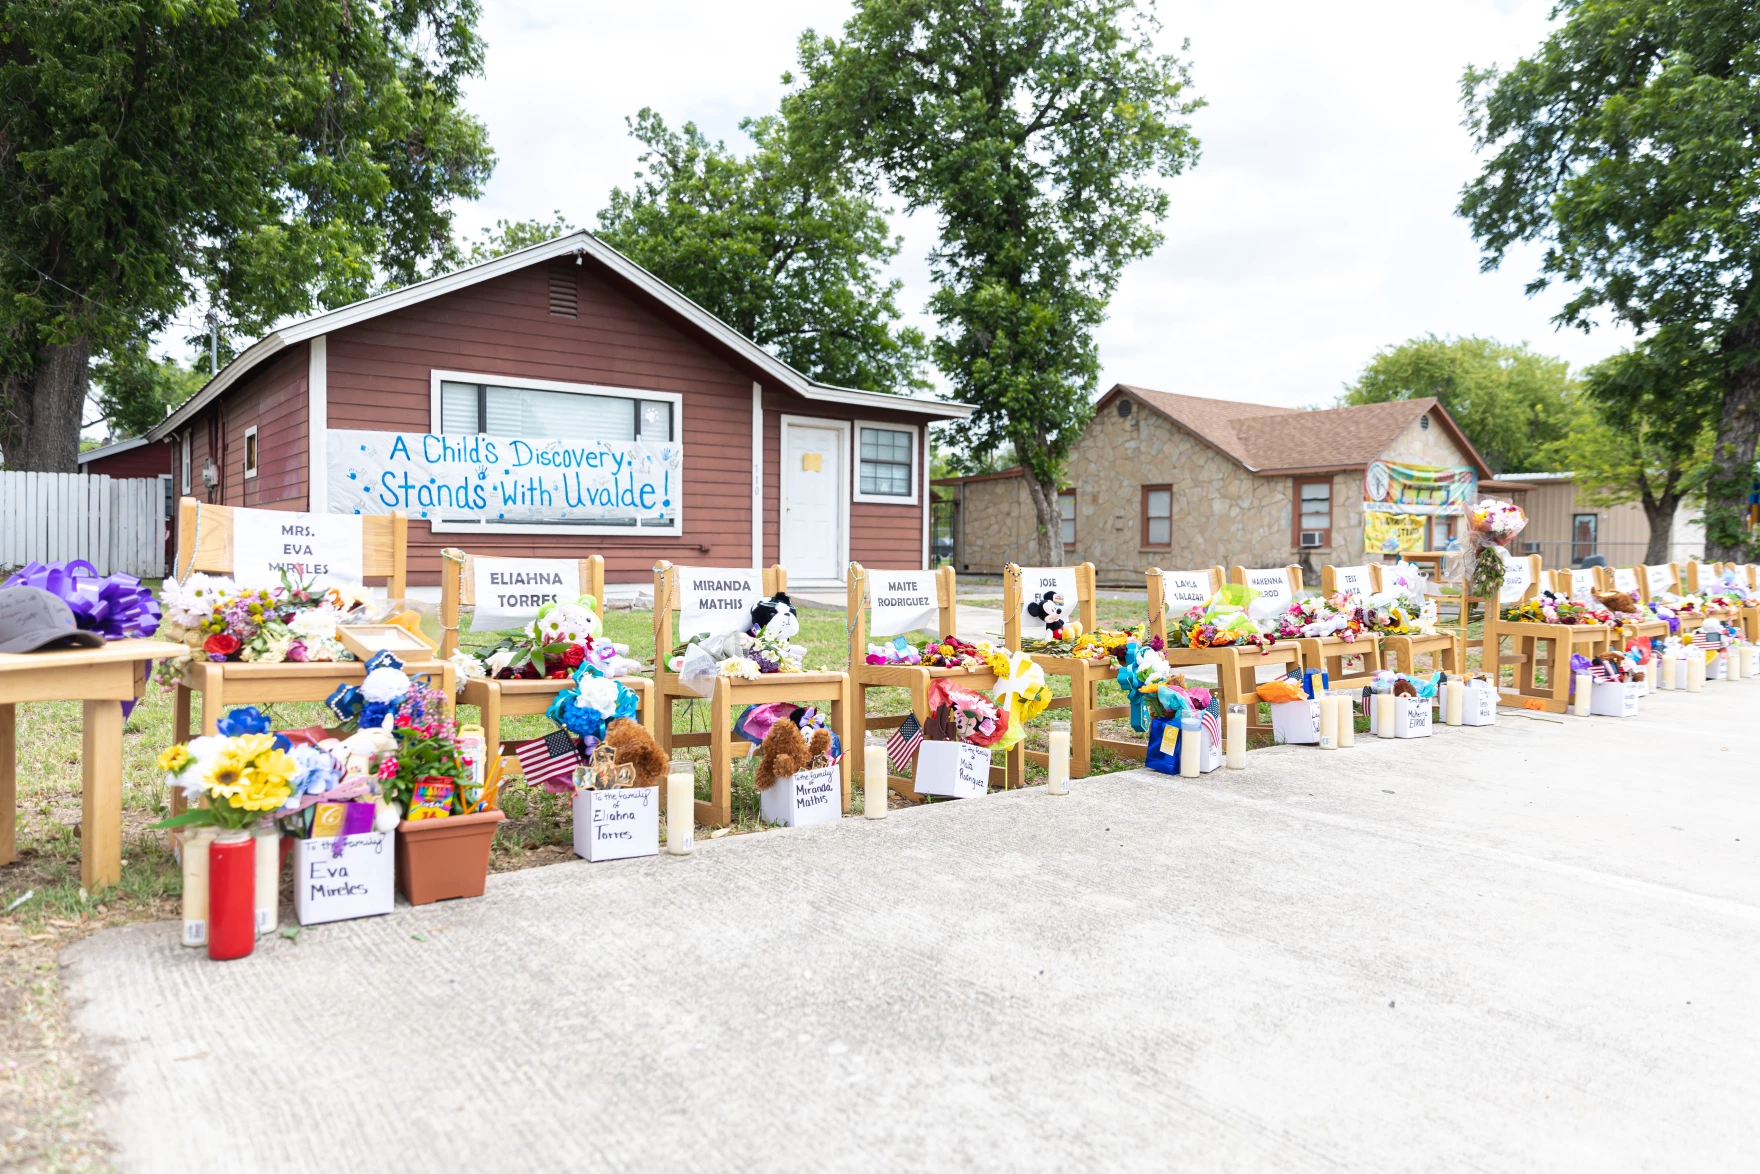 ©Sipa USA/Joshua Guerra/Sipa USA via Reuters.: Twenty one chairs, flags and crosses are displayed in front of local businesses on May 30, 2022, in Uvalde. They each honor the 19 students and two teachers killed in a mass shooting at Robb Elementary School in Uvalde.